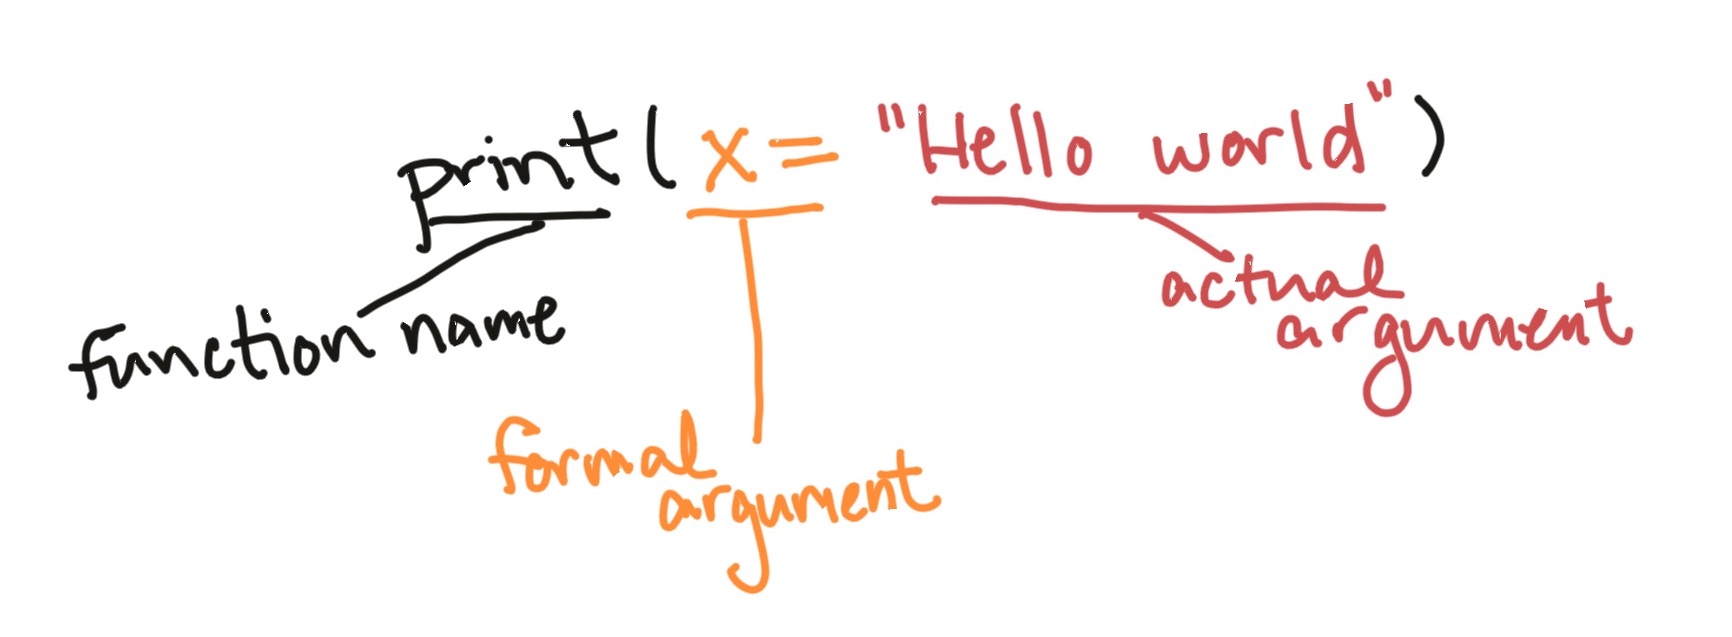 Main parts of a function call. This example is calling a function with the name 'print'. The function call has one argument, with a formal argument of 'x', which in this call is provided the named argument 'Hello world'.